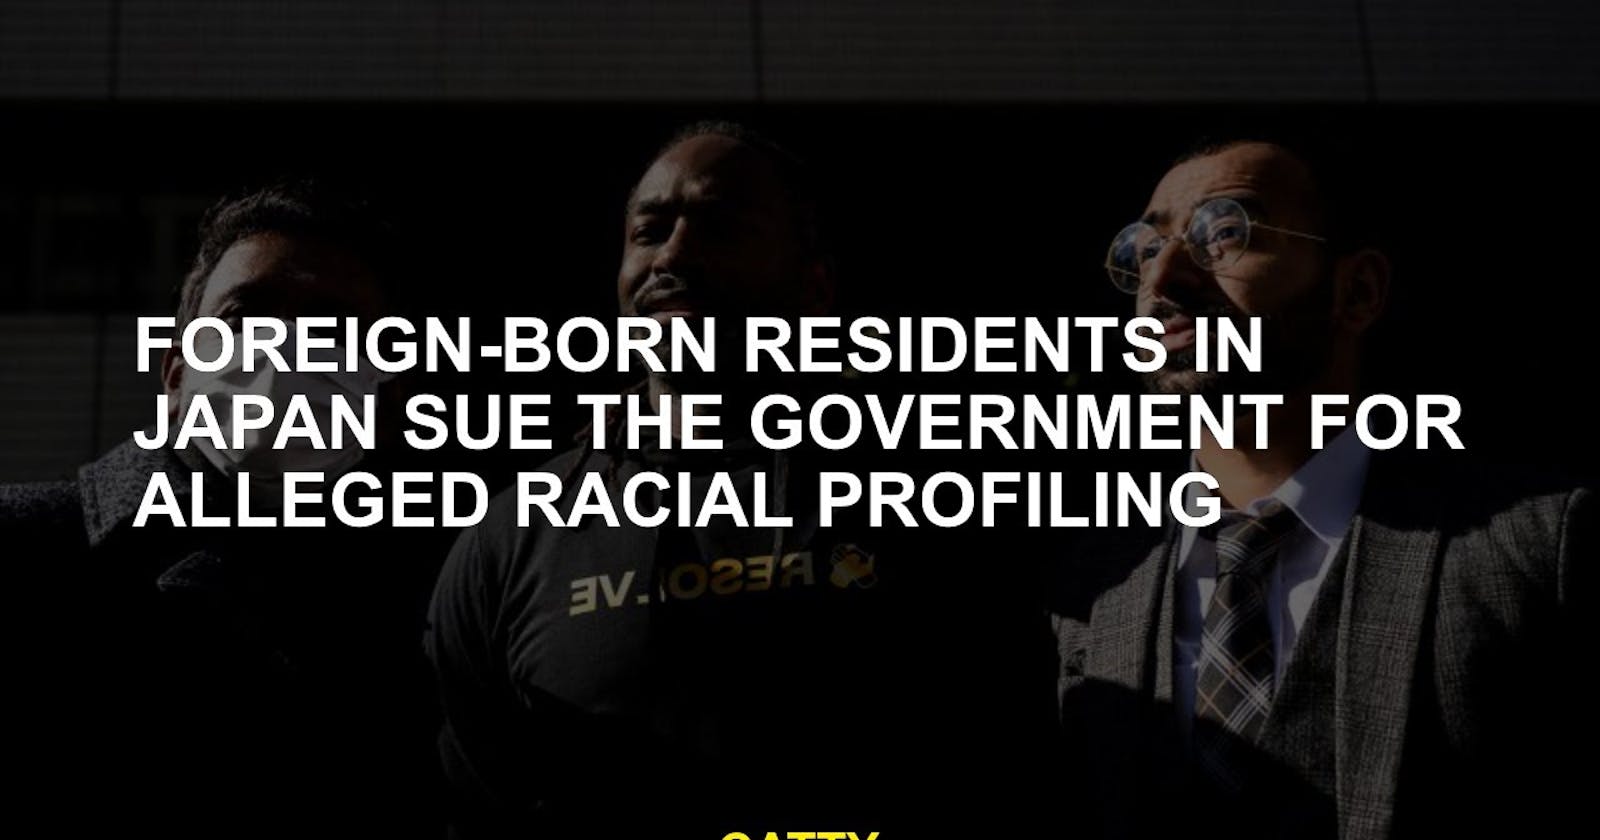 Foreign-born residents in Japan sue the government for alleged racial profiling